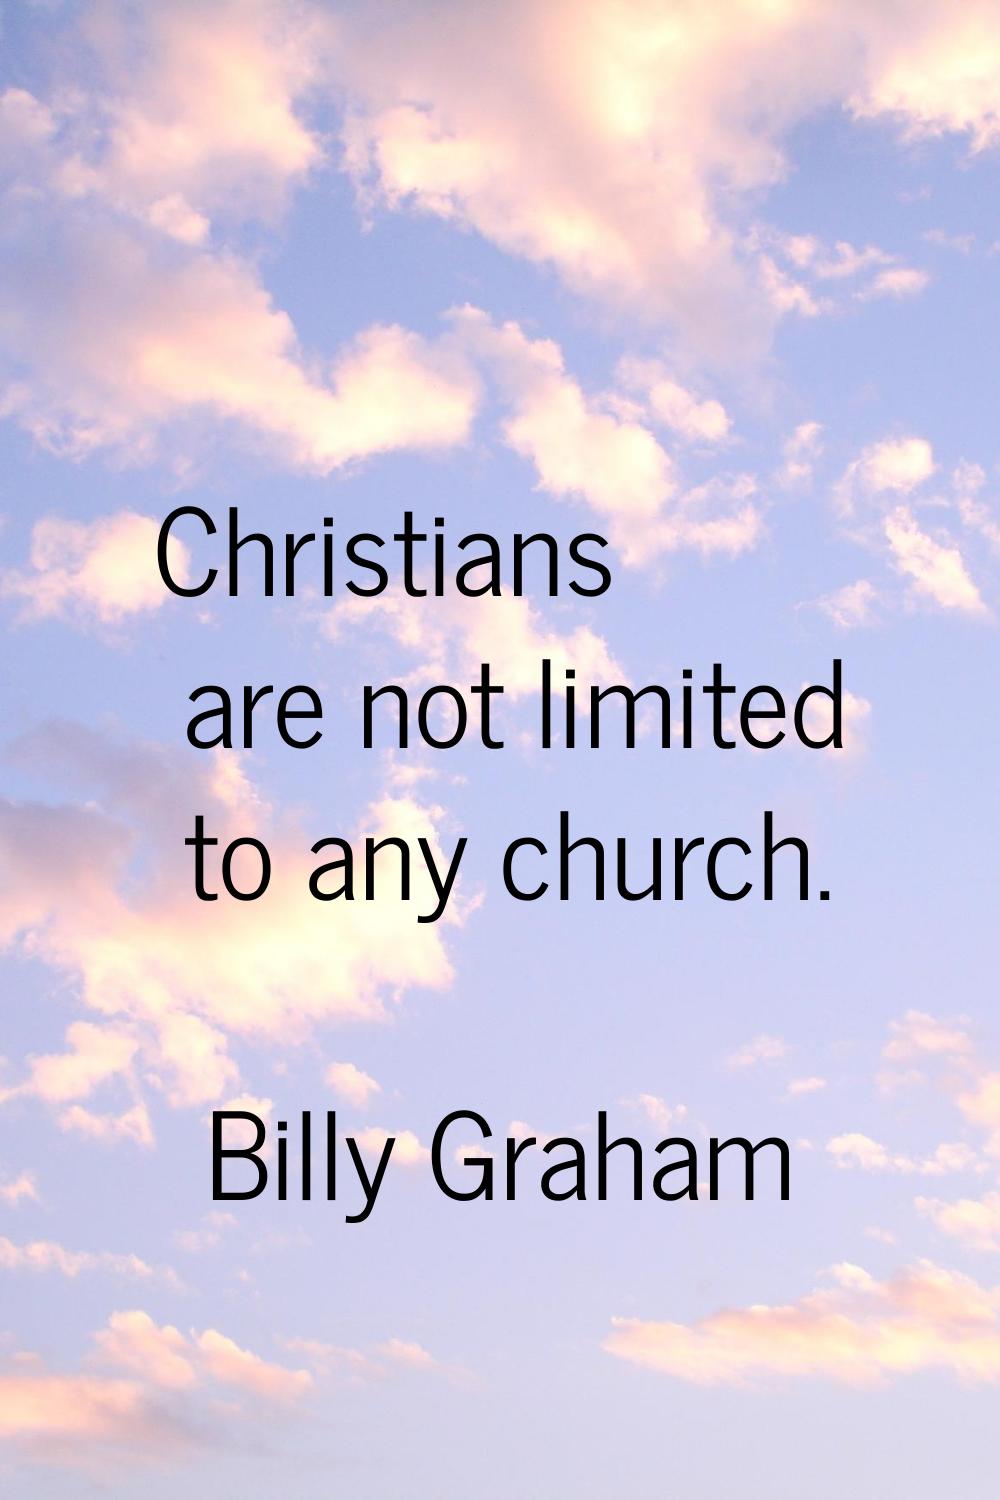 Christians are not limited to any church.